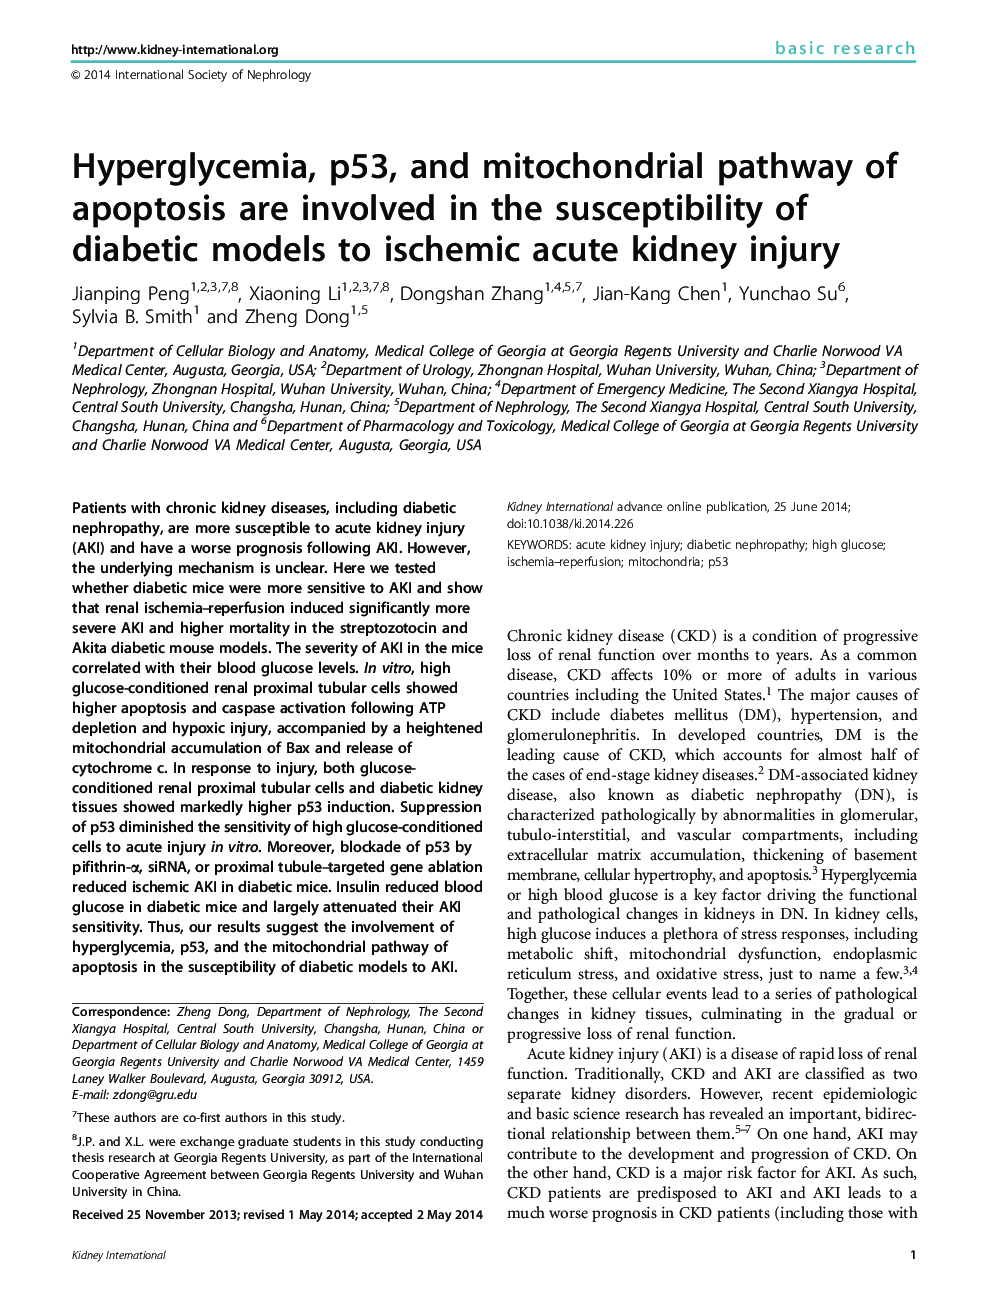 Hyperglycemia, p53, and mitochondrial pathway of apoptosis are involved in the susceptibility of diabetic models to ischemic acute kidney injury